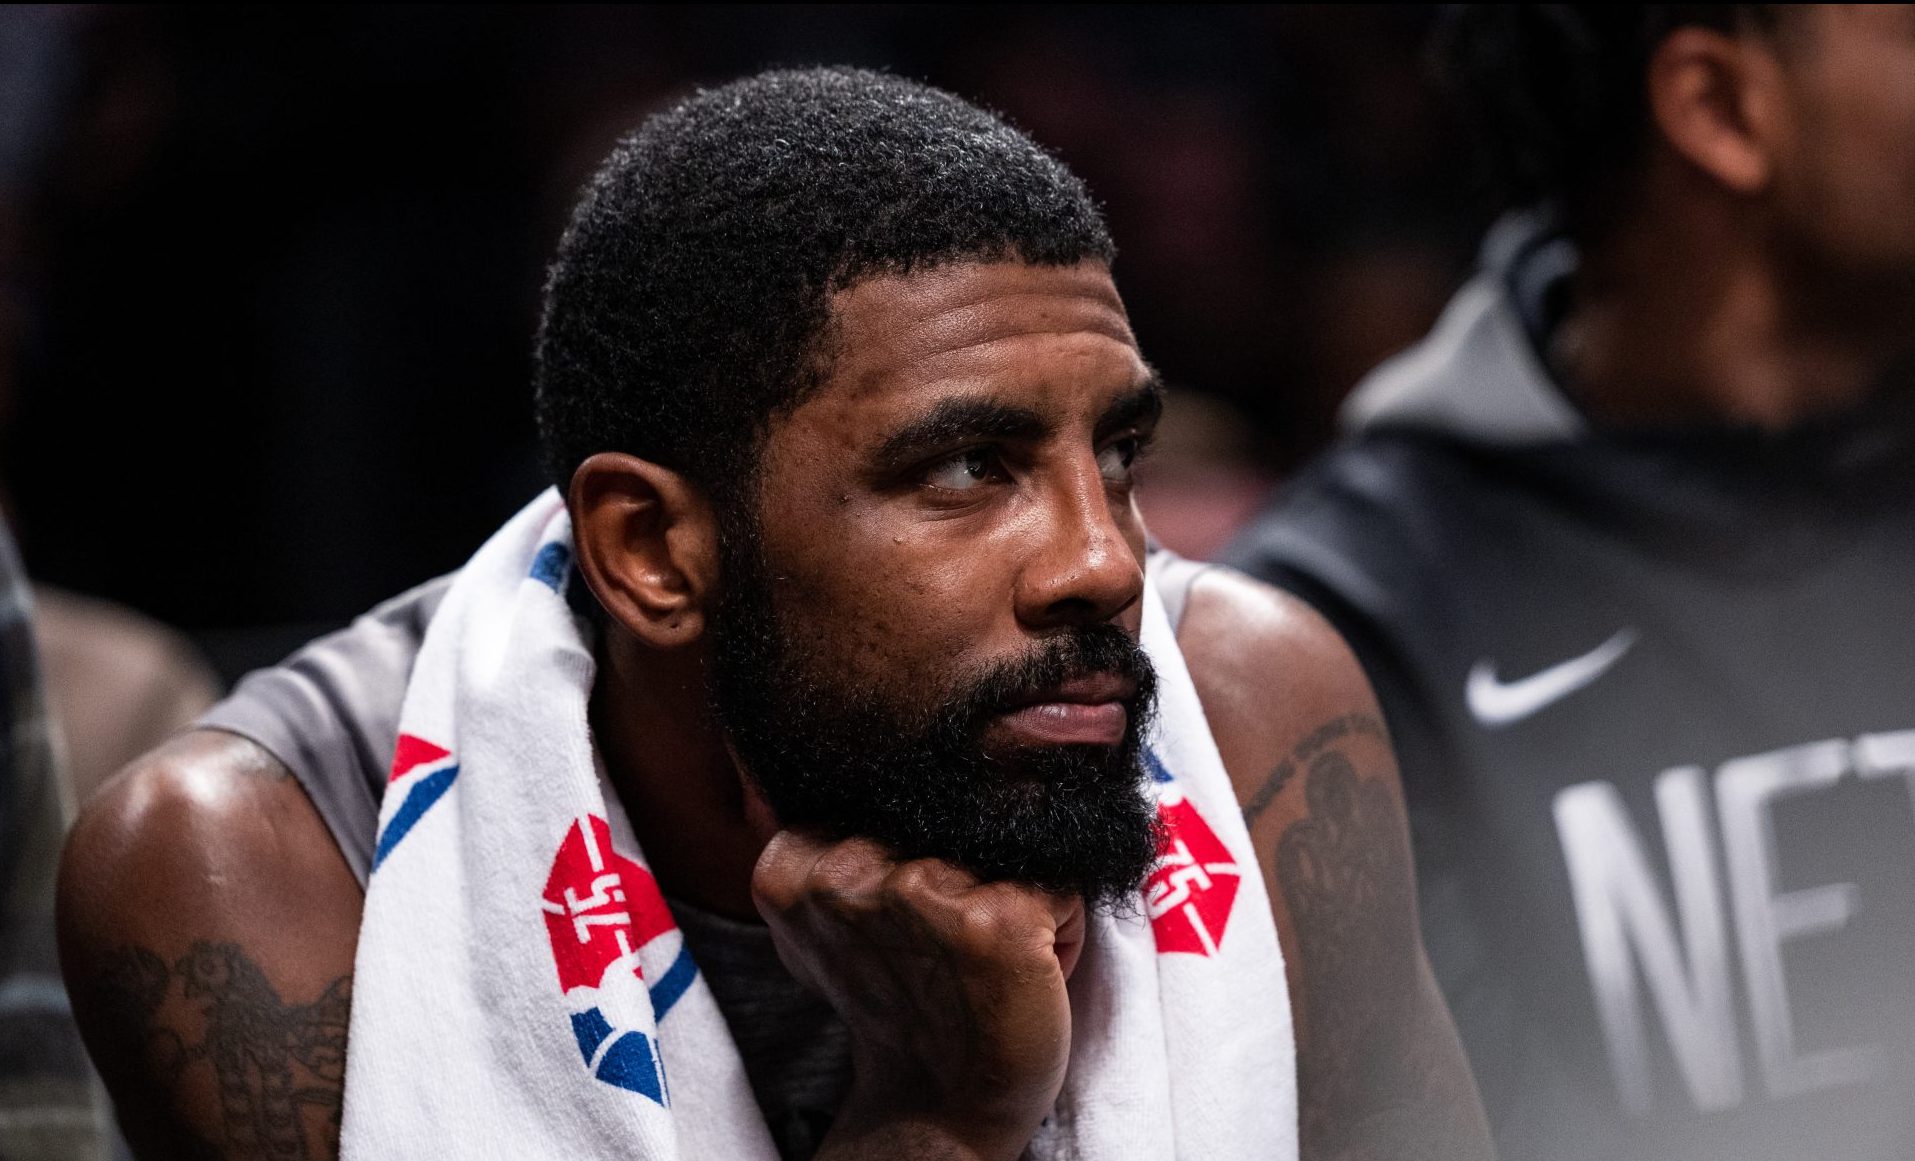 Nets Suspend Kyrie Irving Without Pay For Five Games Amid Anti-Semitism Backlash